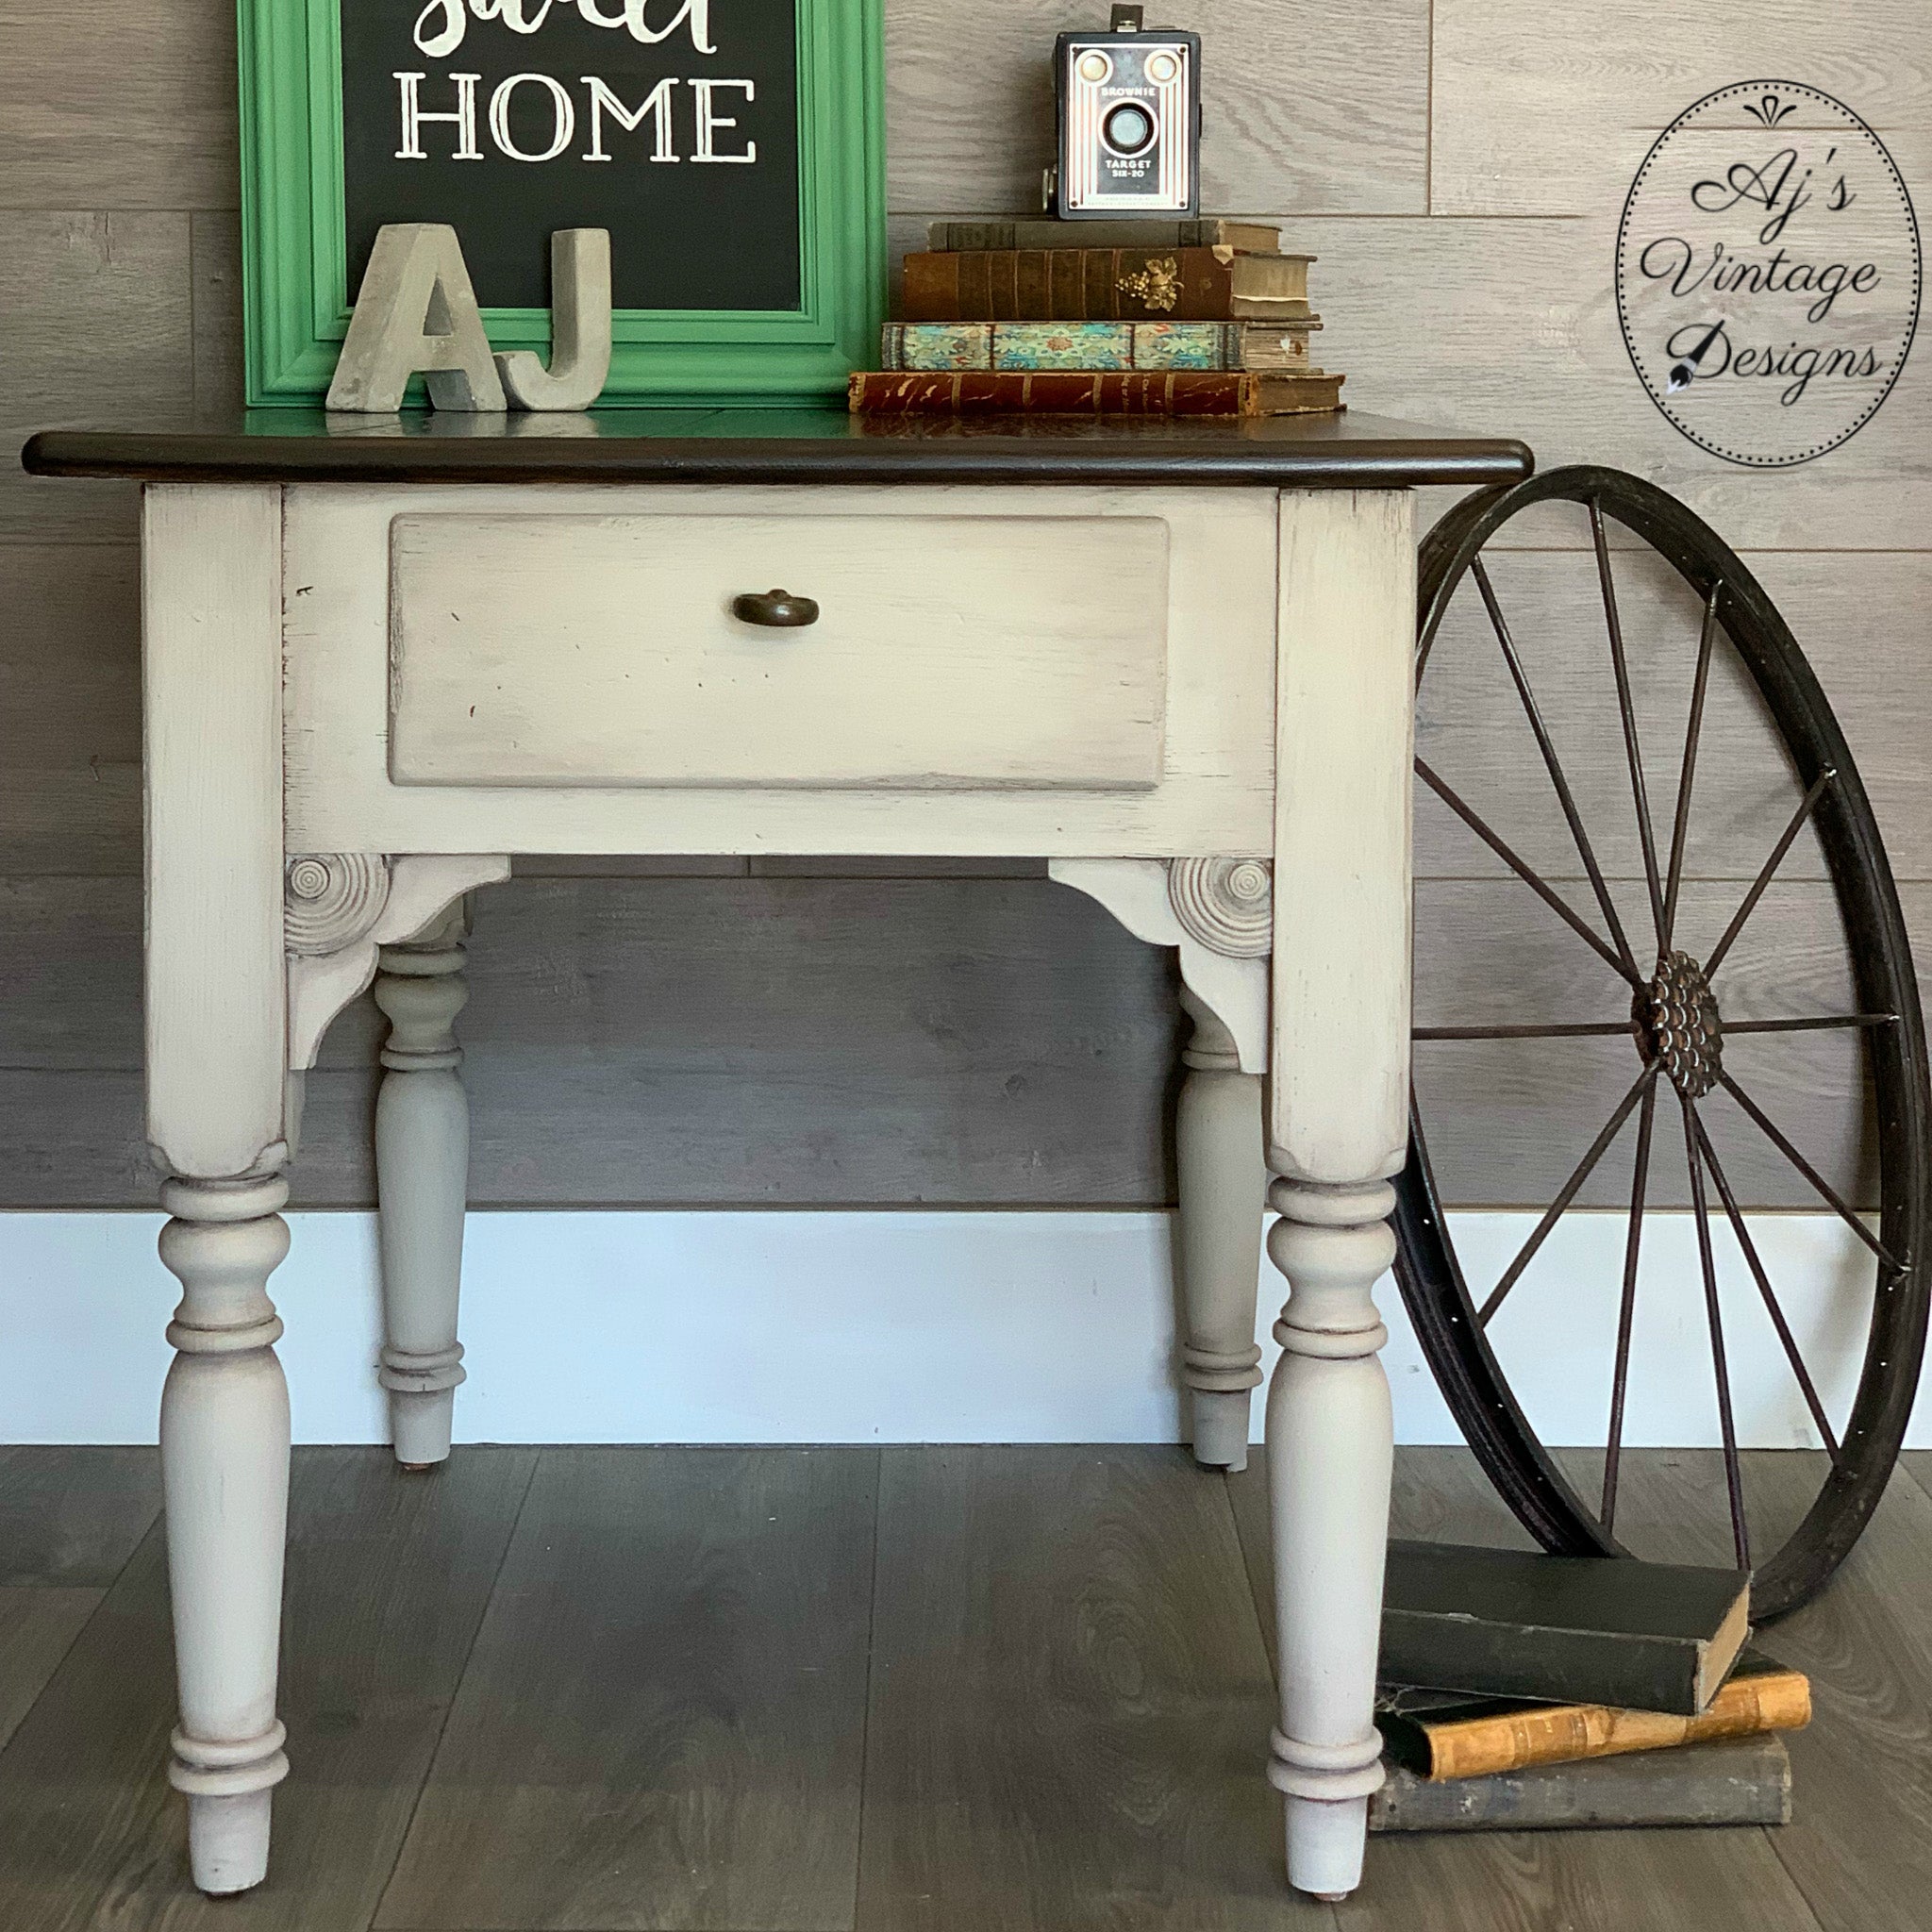 A vintage end table refurbished by Aj's Vintage Designs is painted in Dixie Belle's Sand Bar chalk mineral paint.